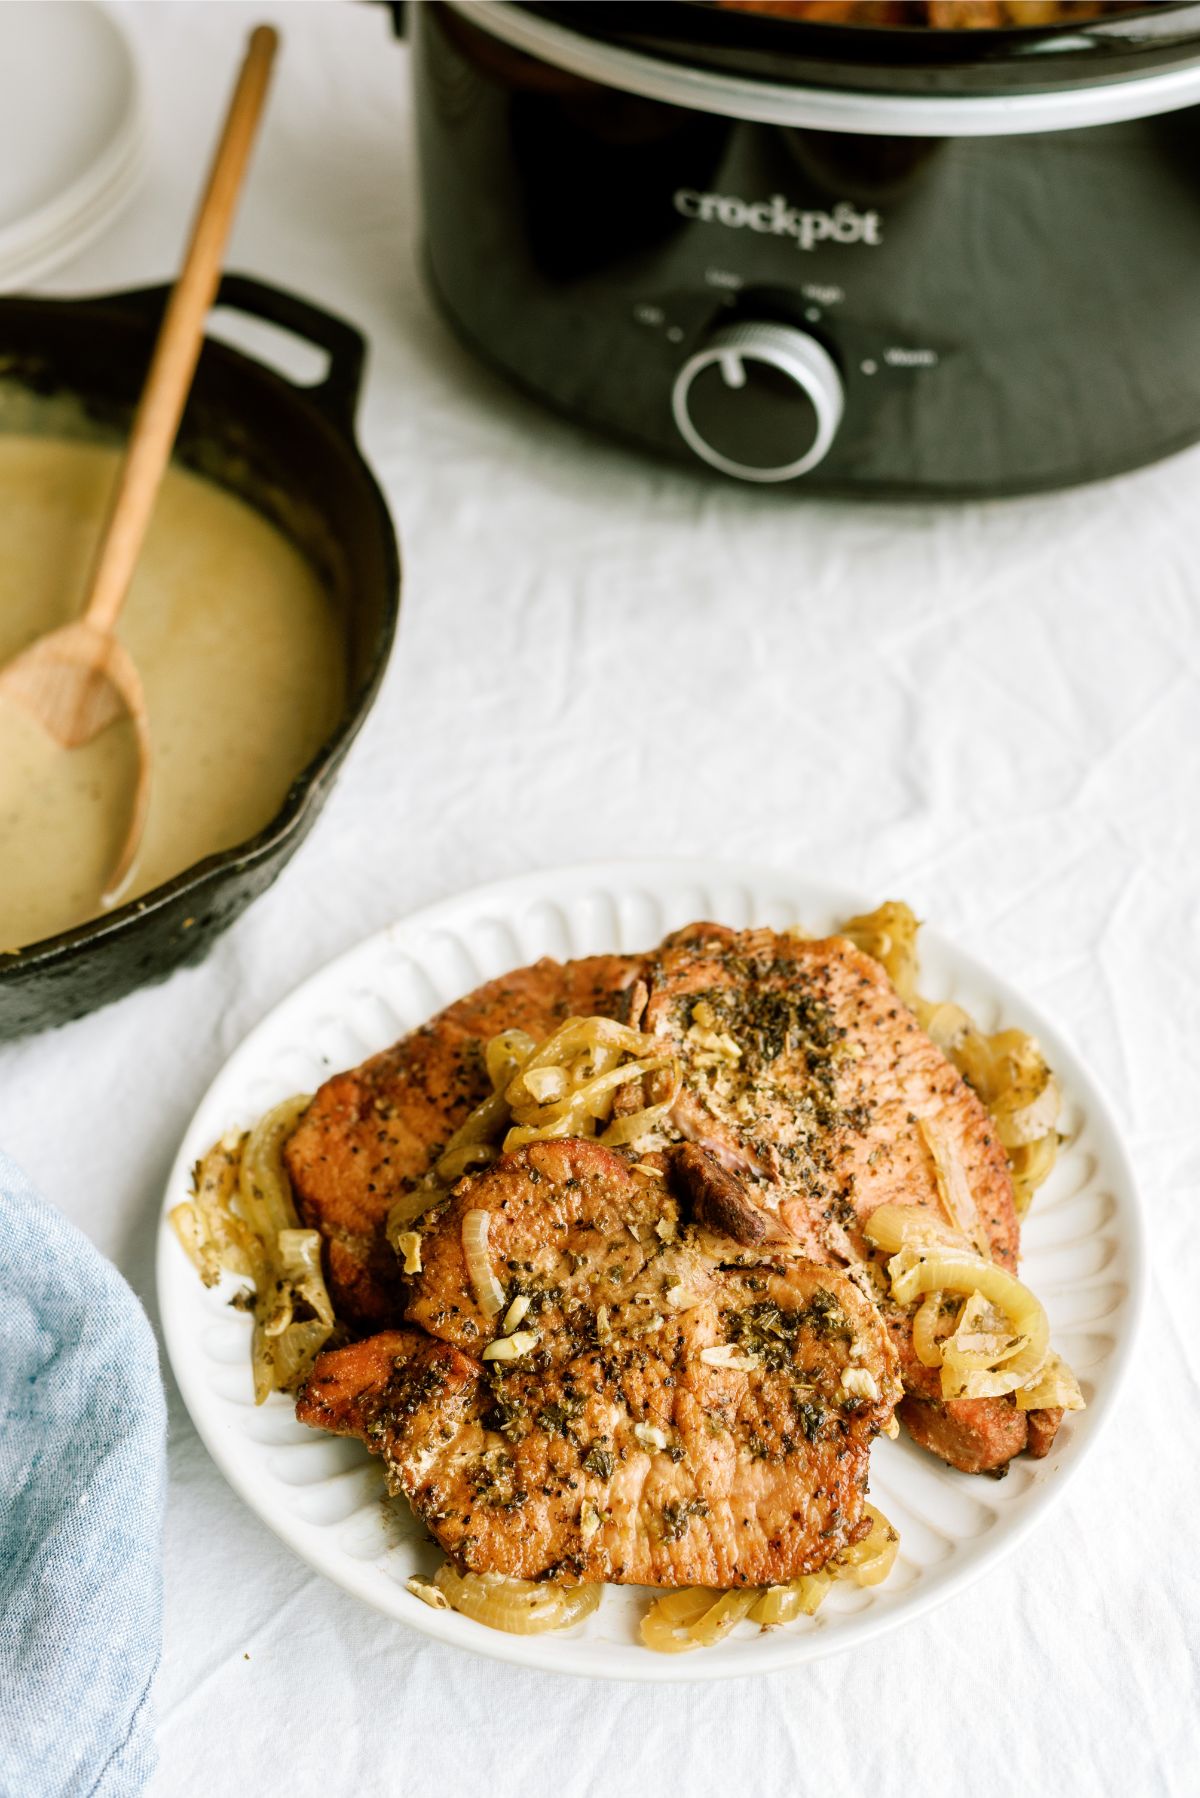 A slow cooker, pan of gravy and plate of cooked pork chops